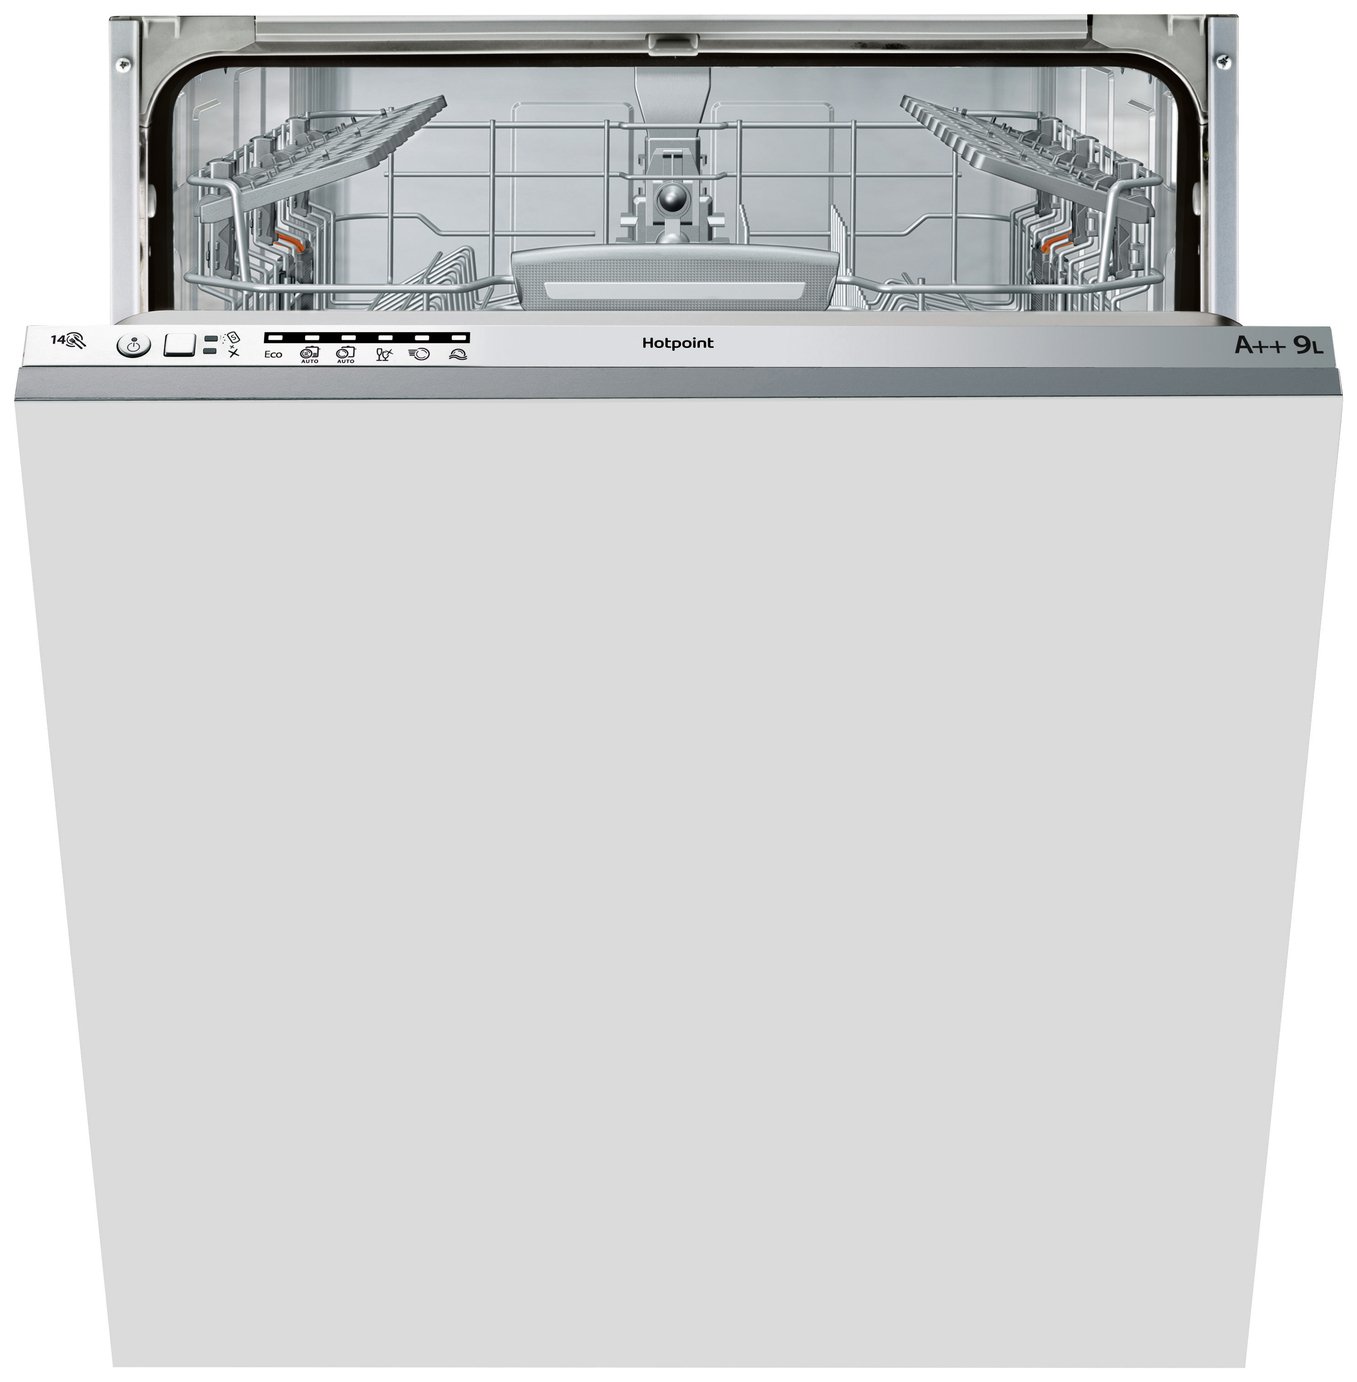 Hotpoint LTB6M126 Full Size Integrated Dishwasher - Graphite